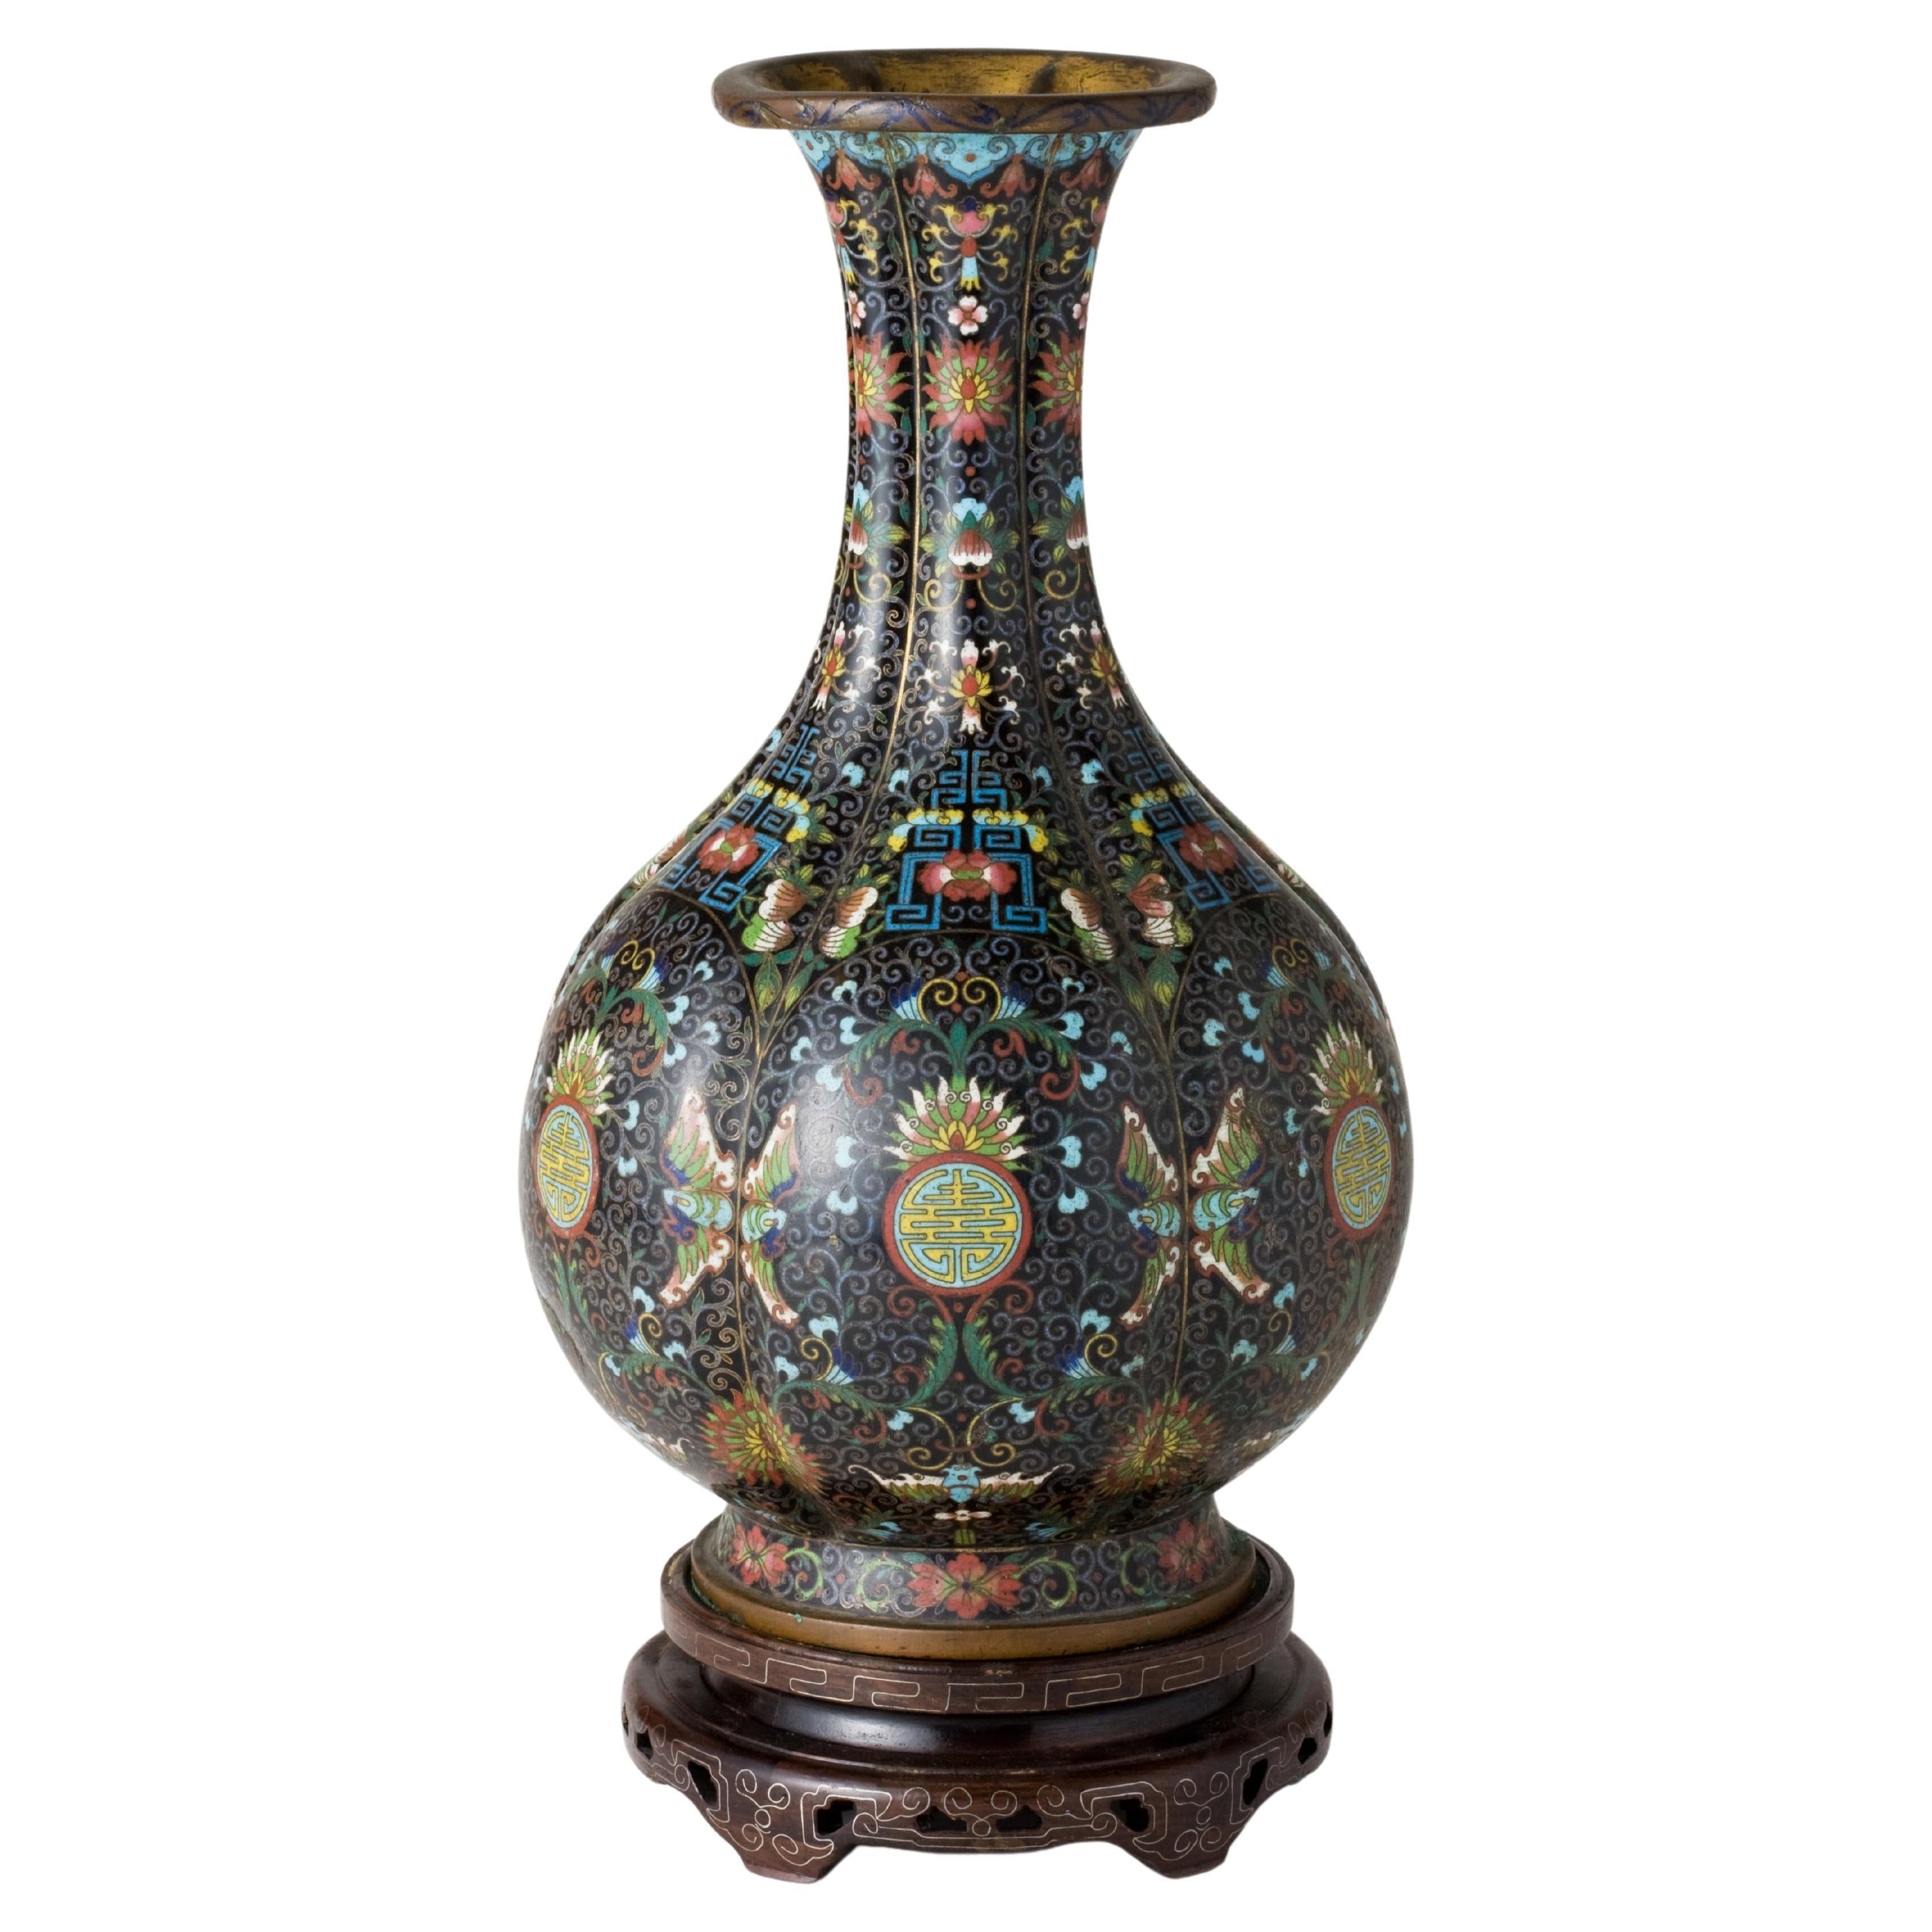 Chinese Cloisonné Vase, Qing Period, 19th Century